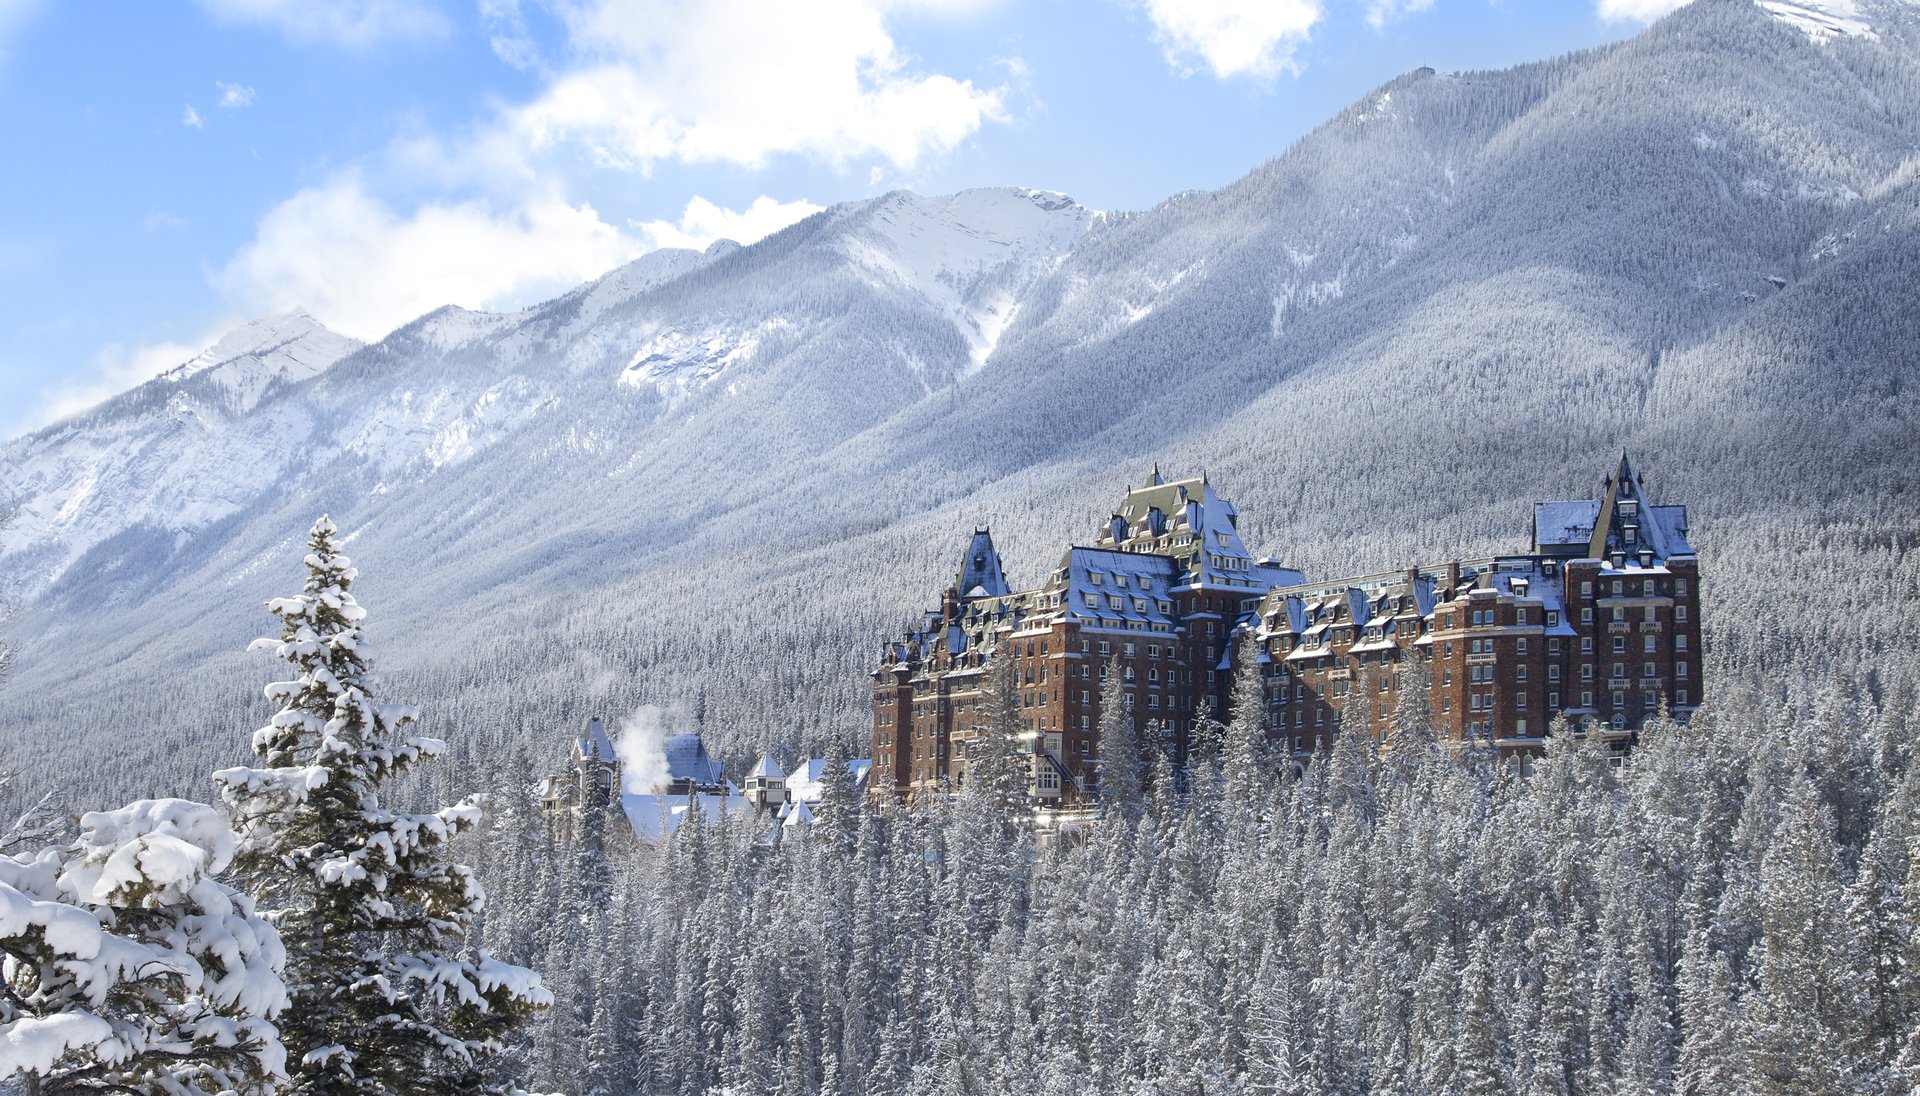 Banff Springs Hotel - Where to stay in Banff